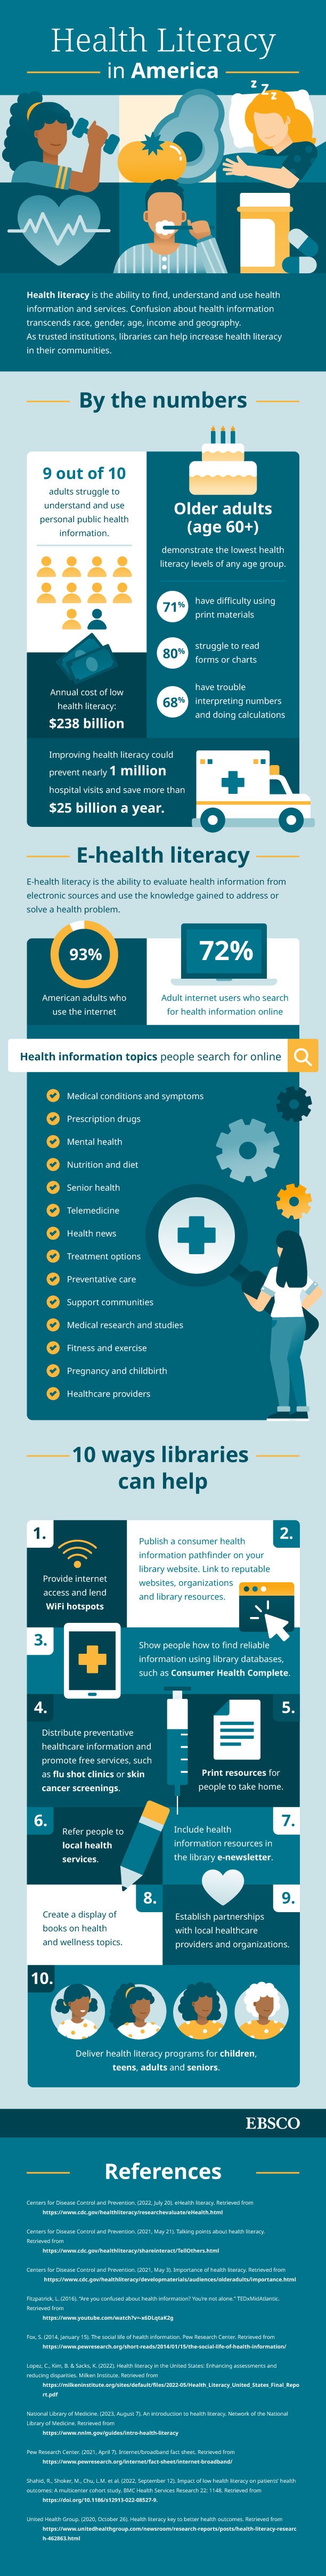 health literacy in america infographic   